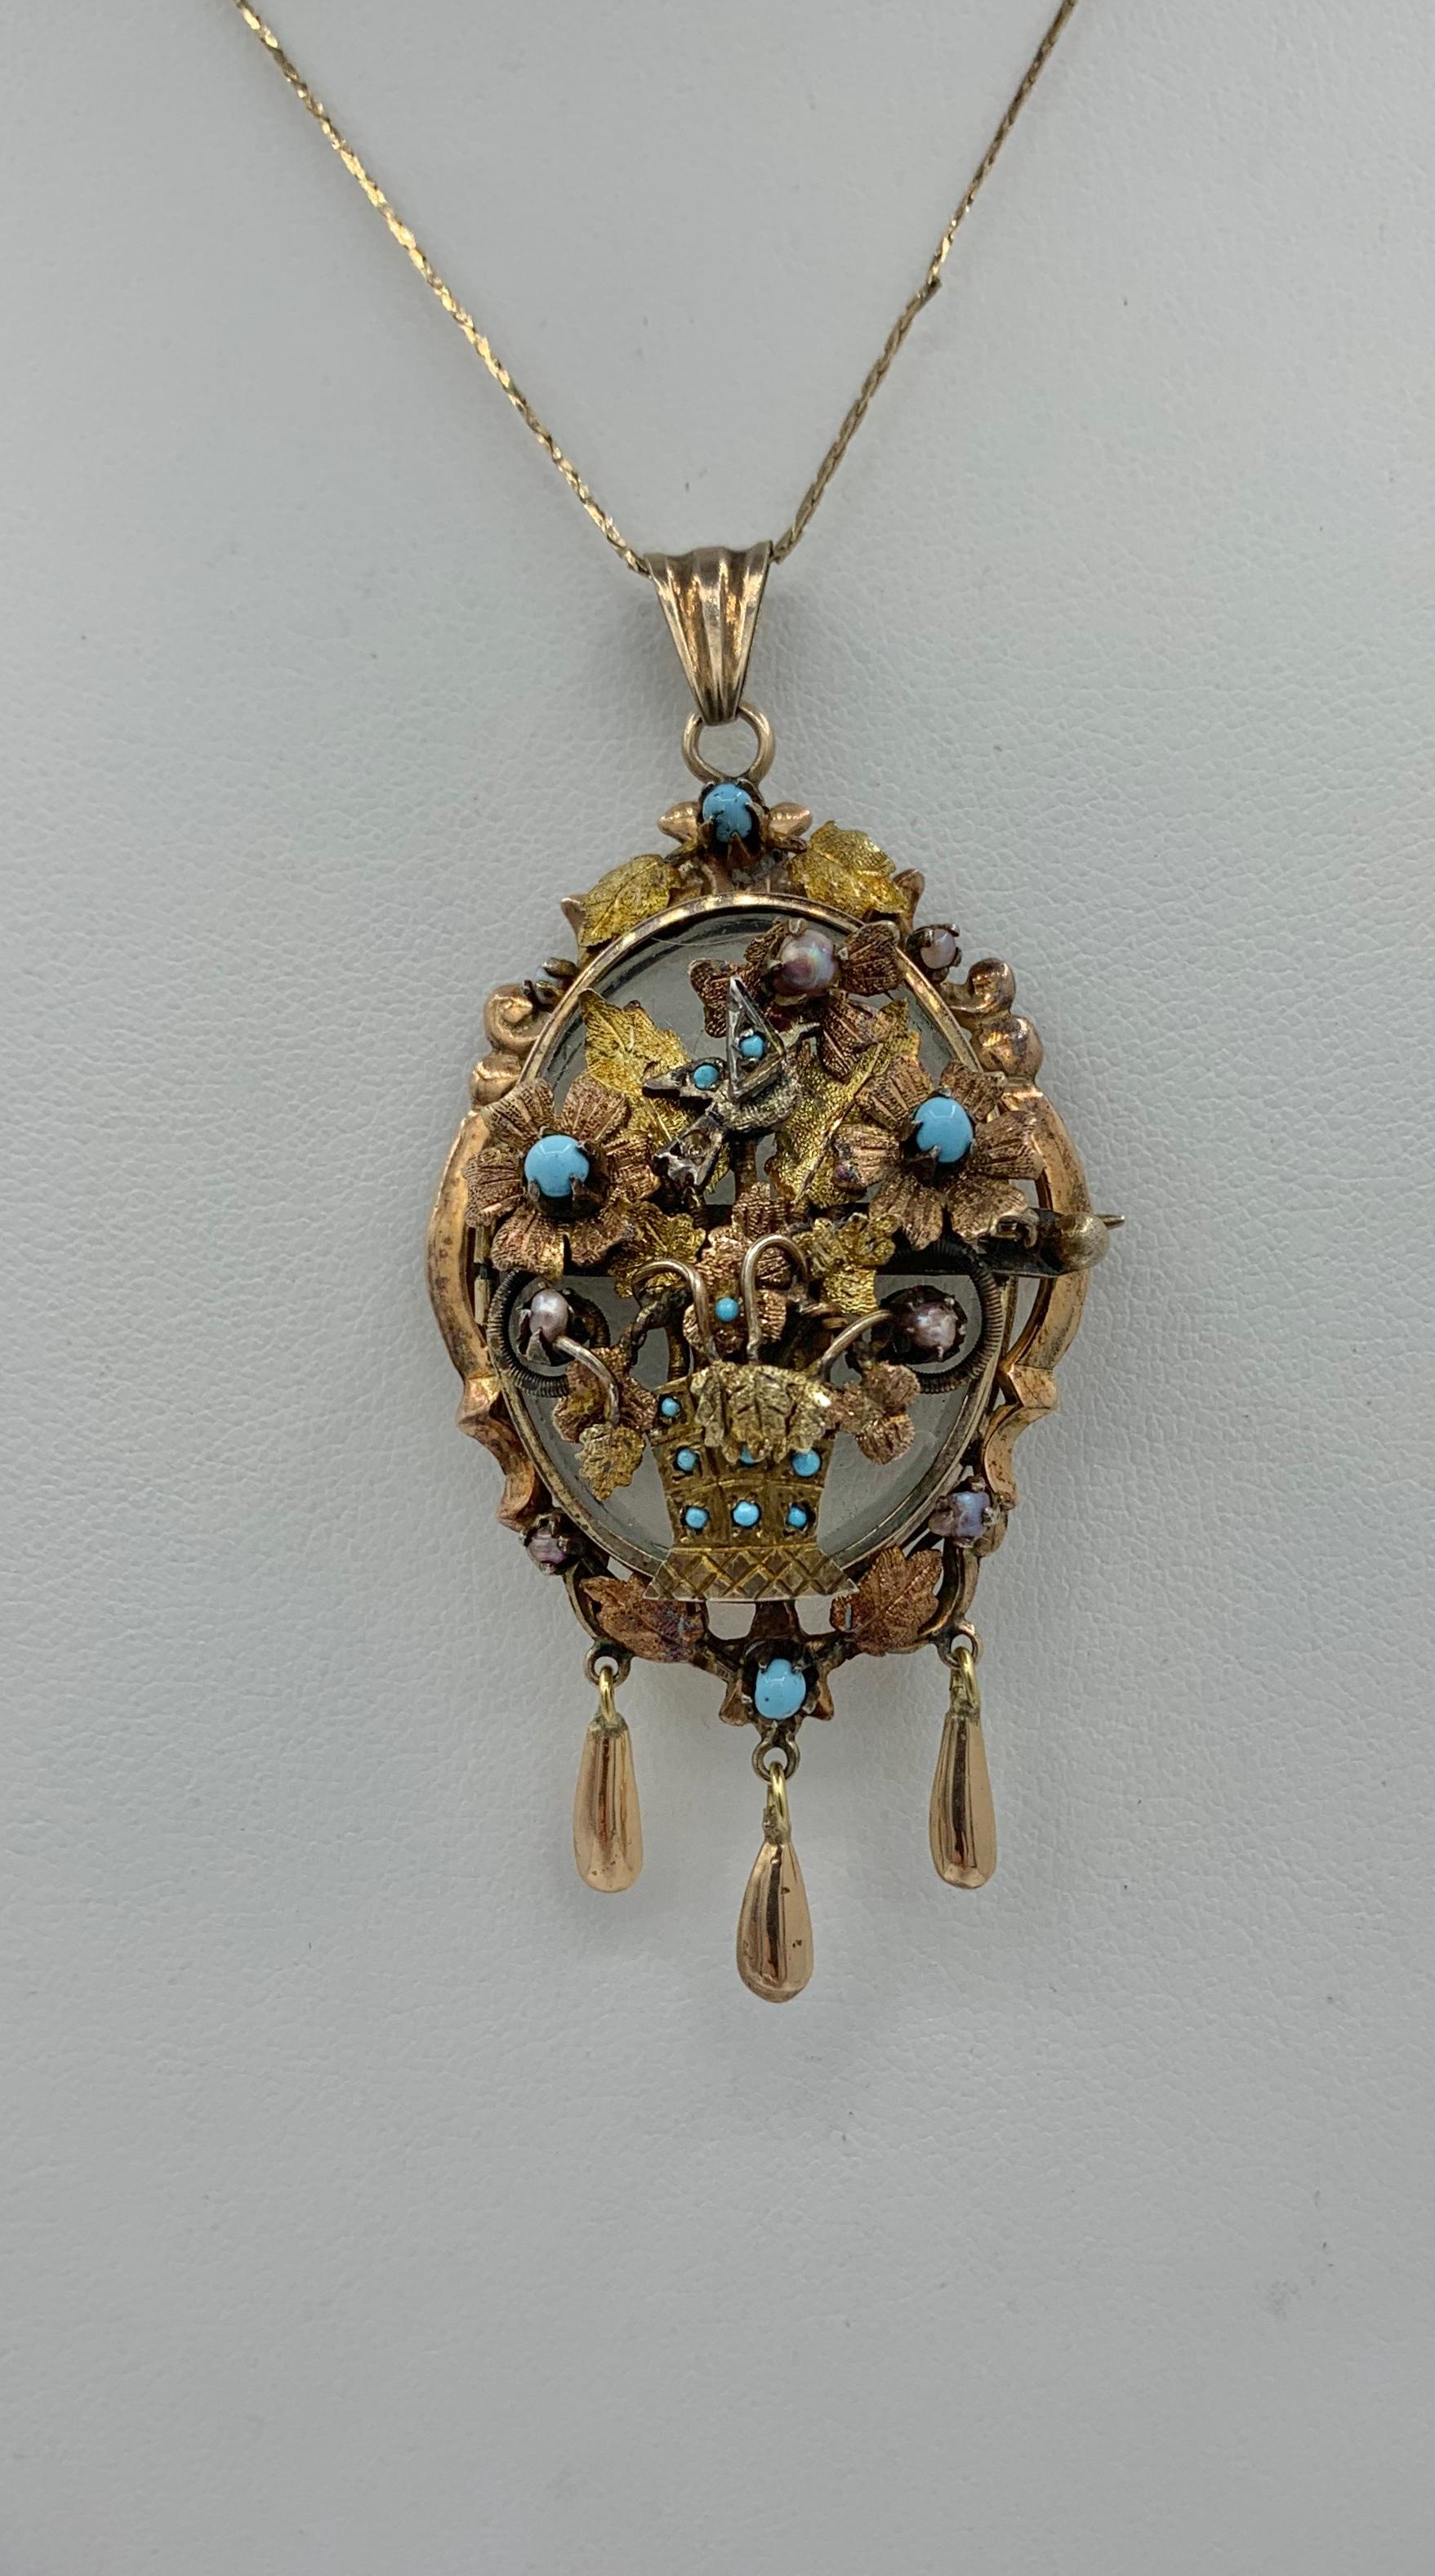 This is a gorgeous and very rare antique Victorian bird dove locket pendant brooch in 14 Karat Gold adorned with Turquoise and Pearls in an extraordinary three-dimensional design of a flower basket bouquet with a flying bird.  The locket is one of